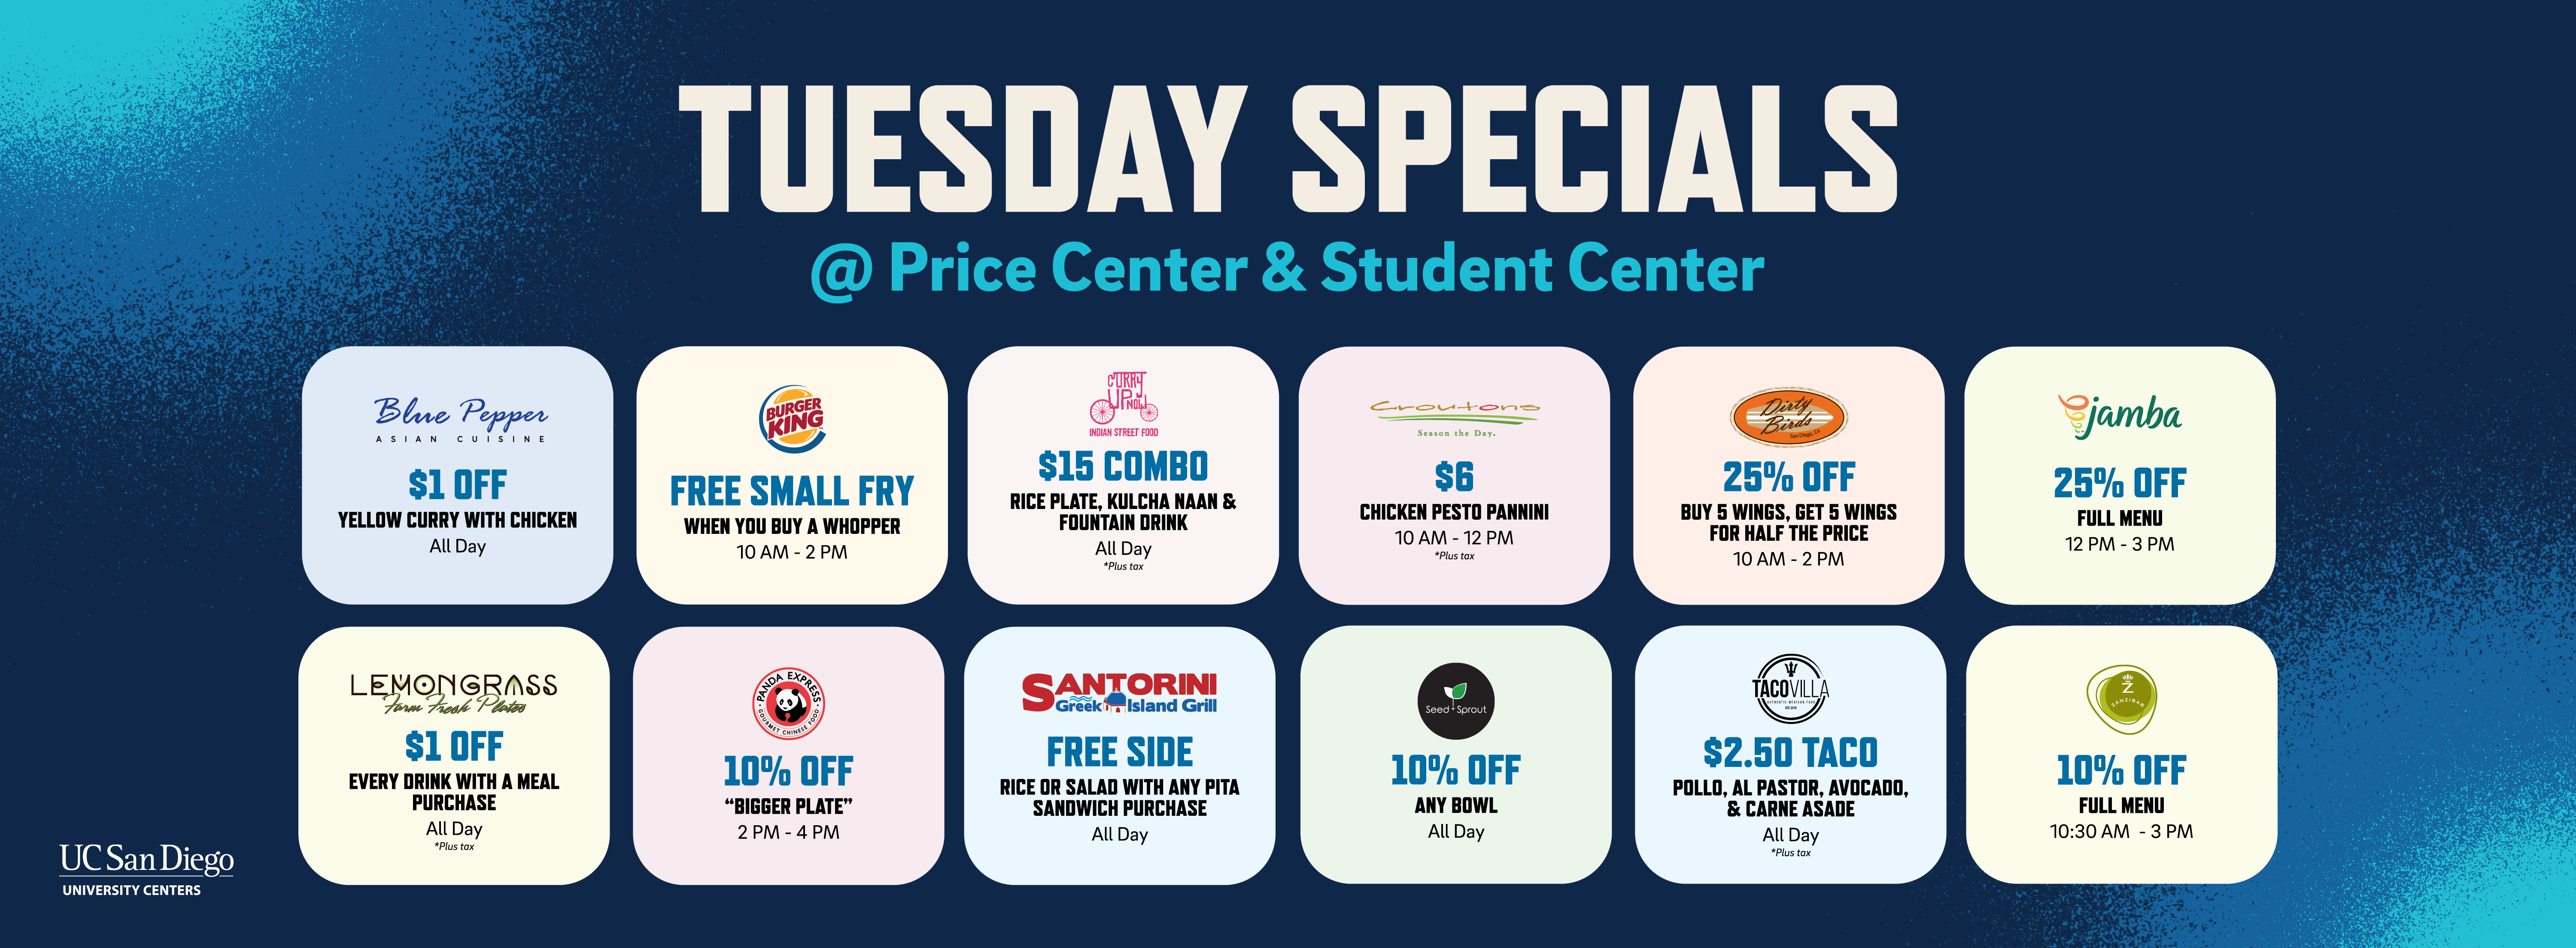 Collage of all the Tuesday Special deals at Price Center and Student Center.